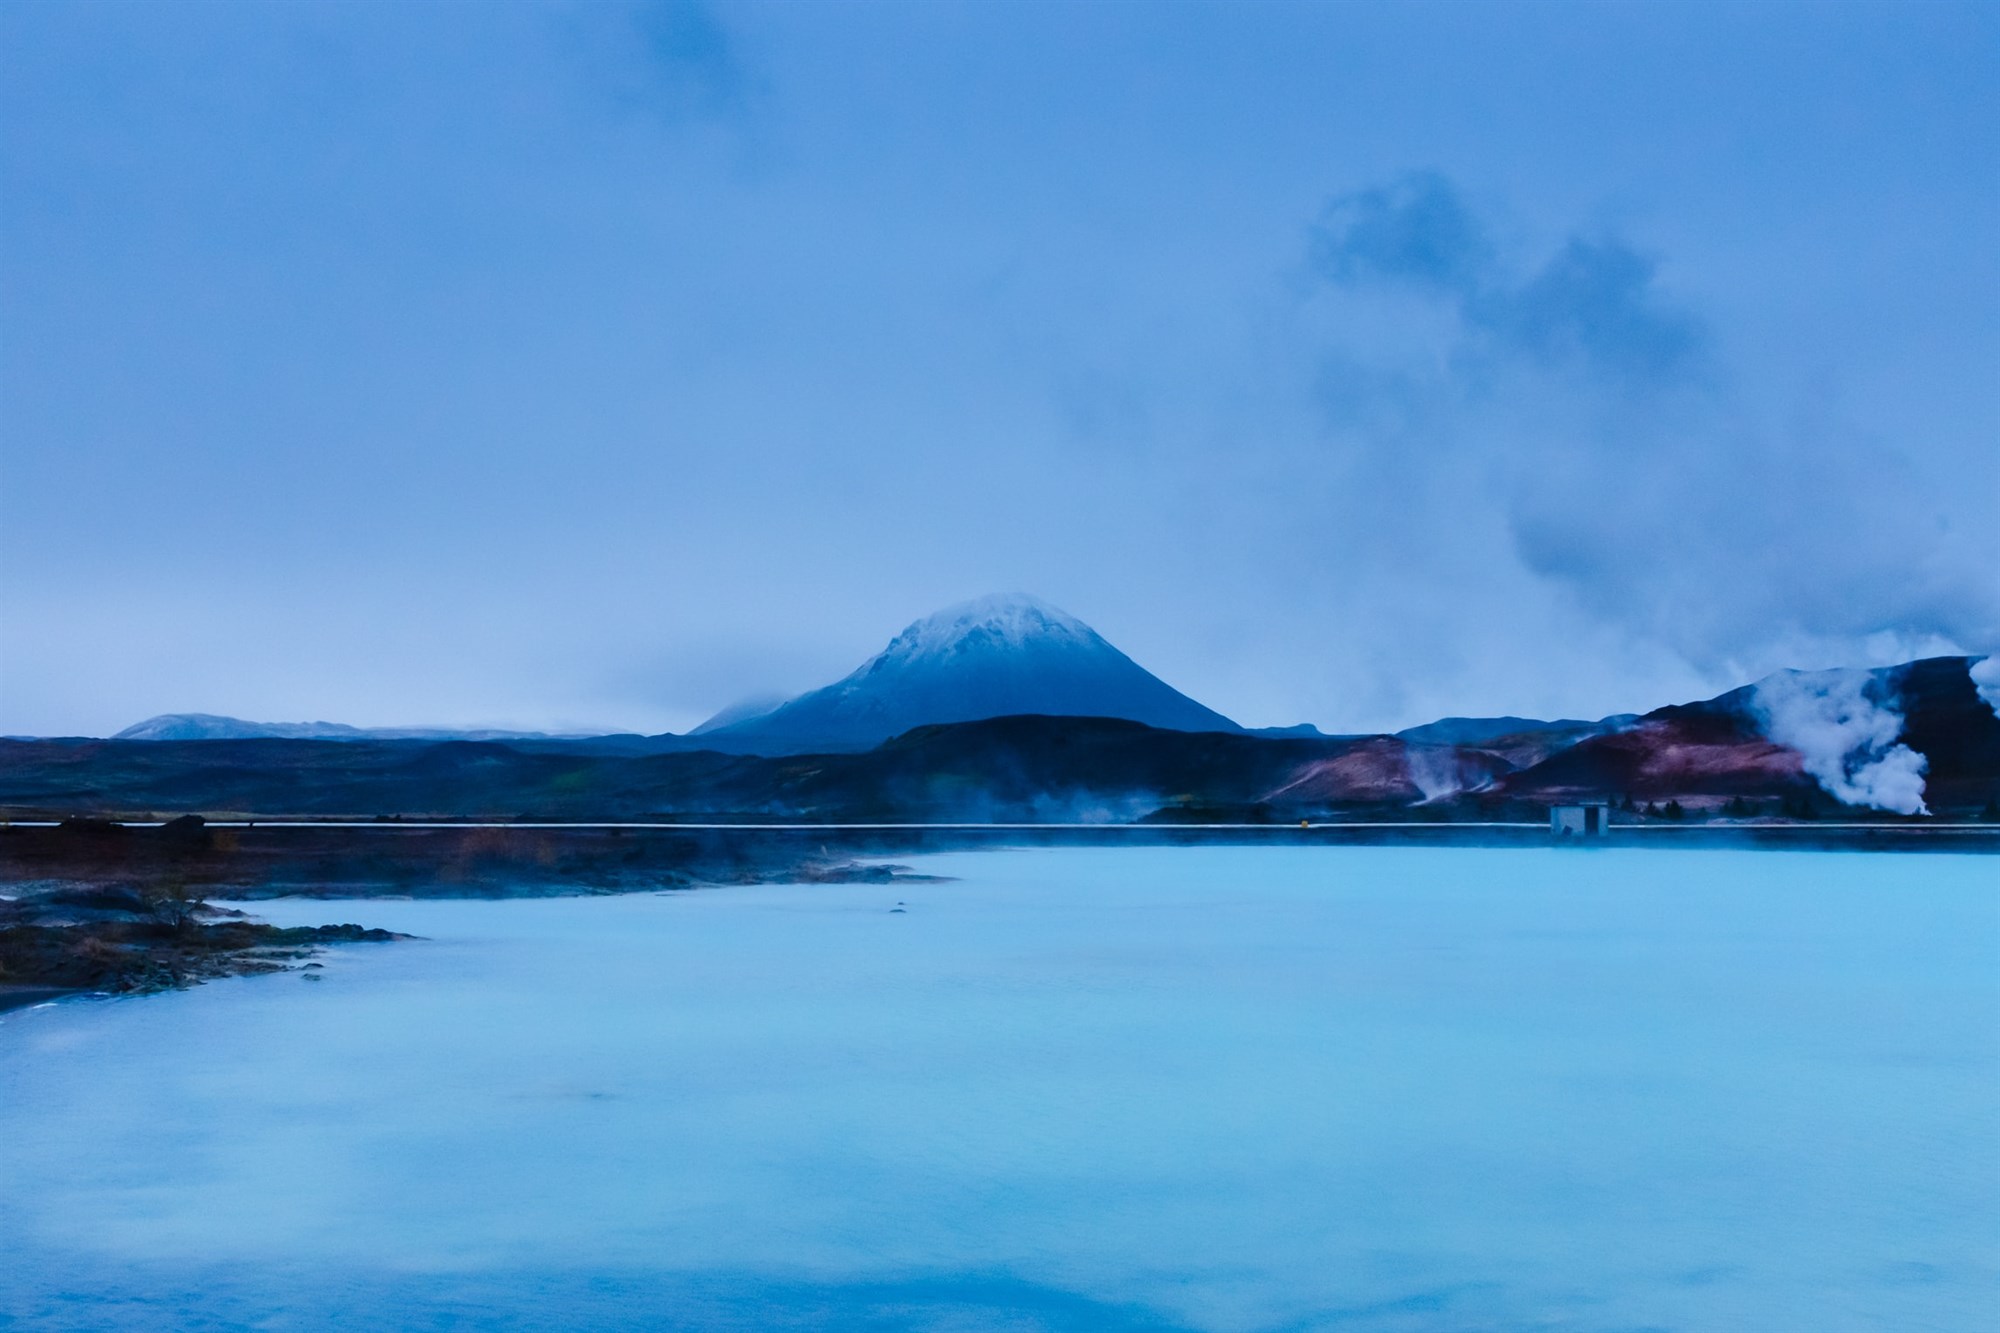 The Mývatn Nature Baths are a set of geothermally heated pools and steam baths found in the Lake Mývatn area. 